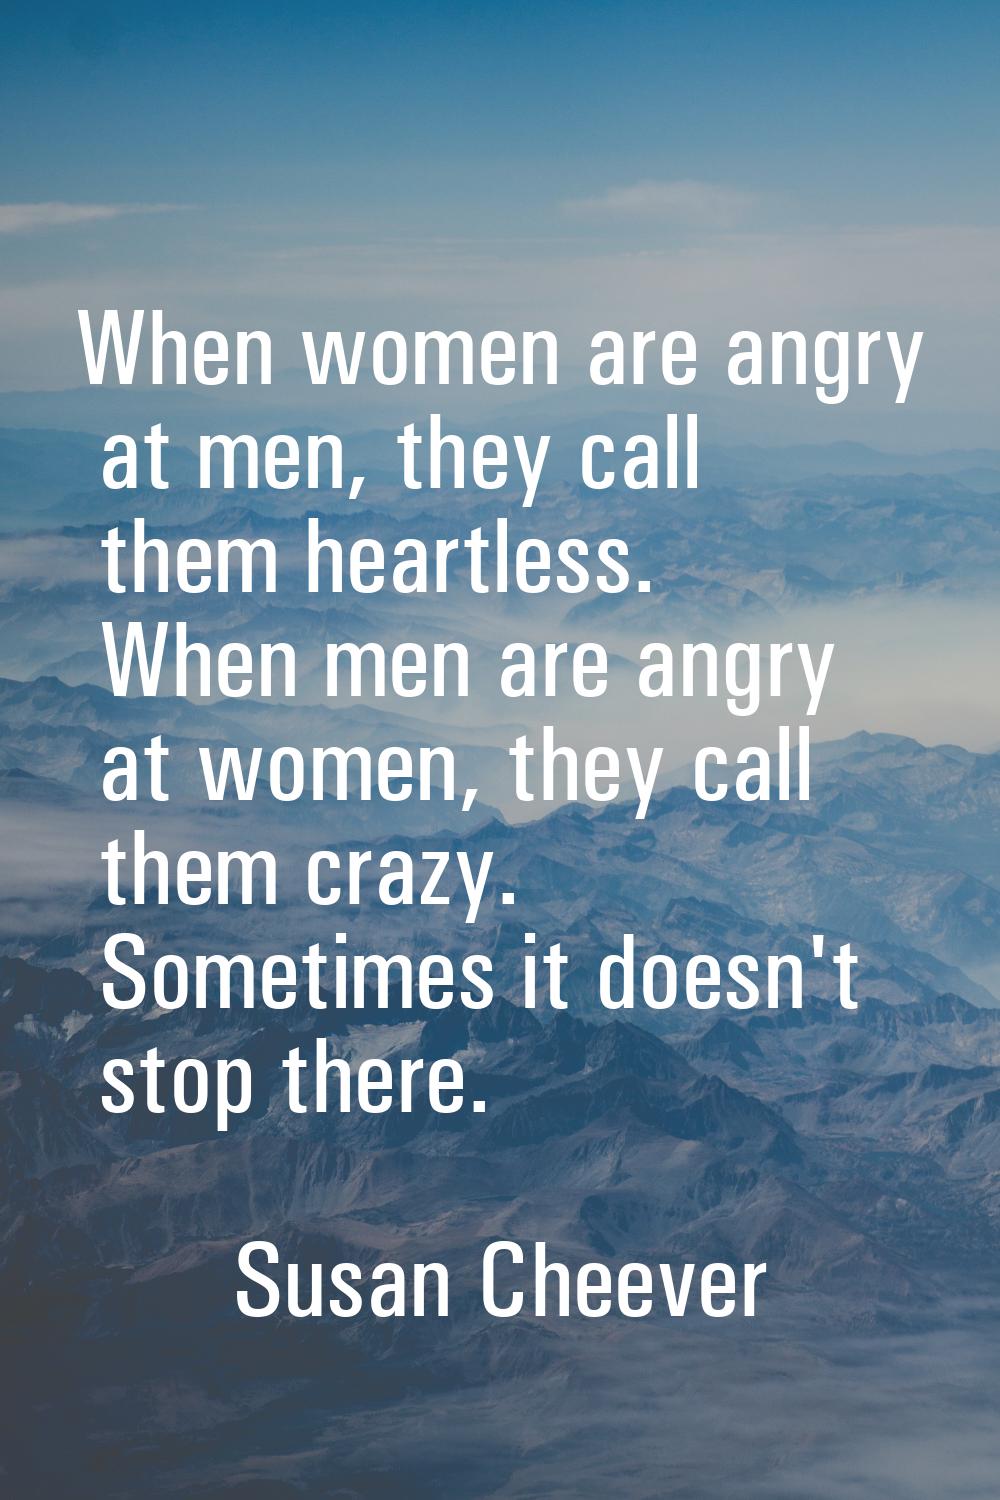 When women are angry at men, they call them heartless. When men are angry at women, they call them 